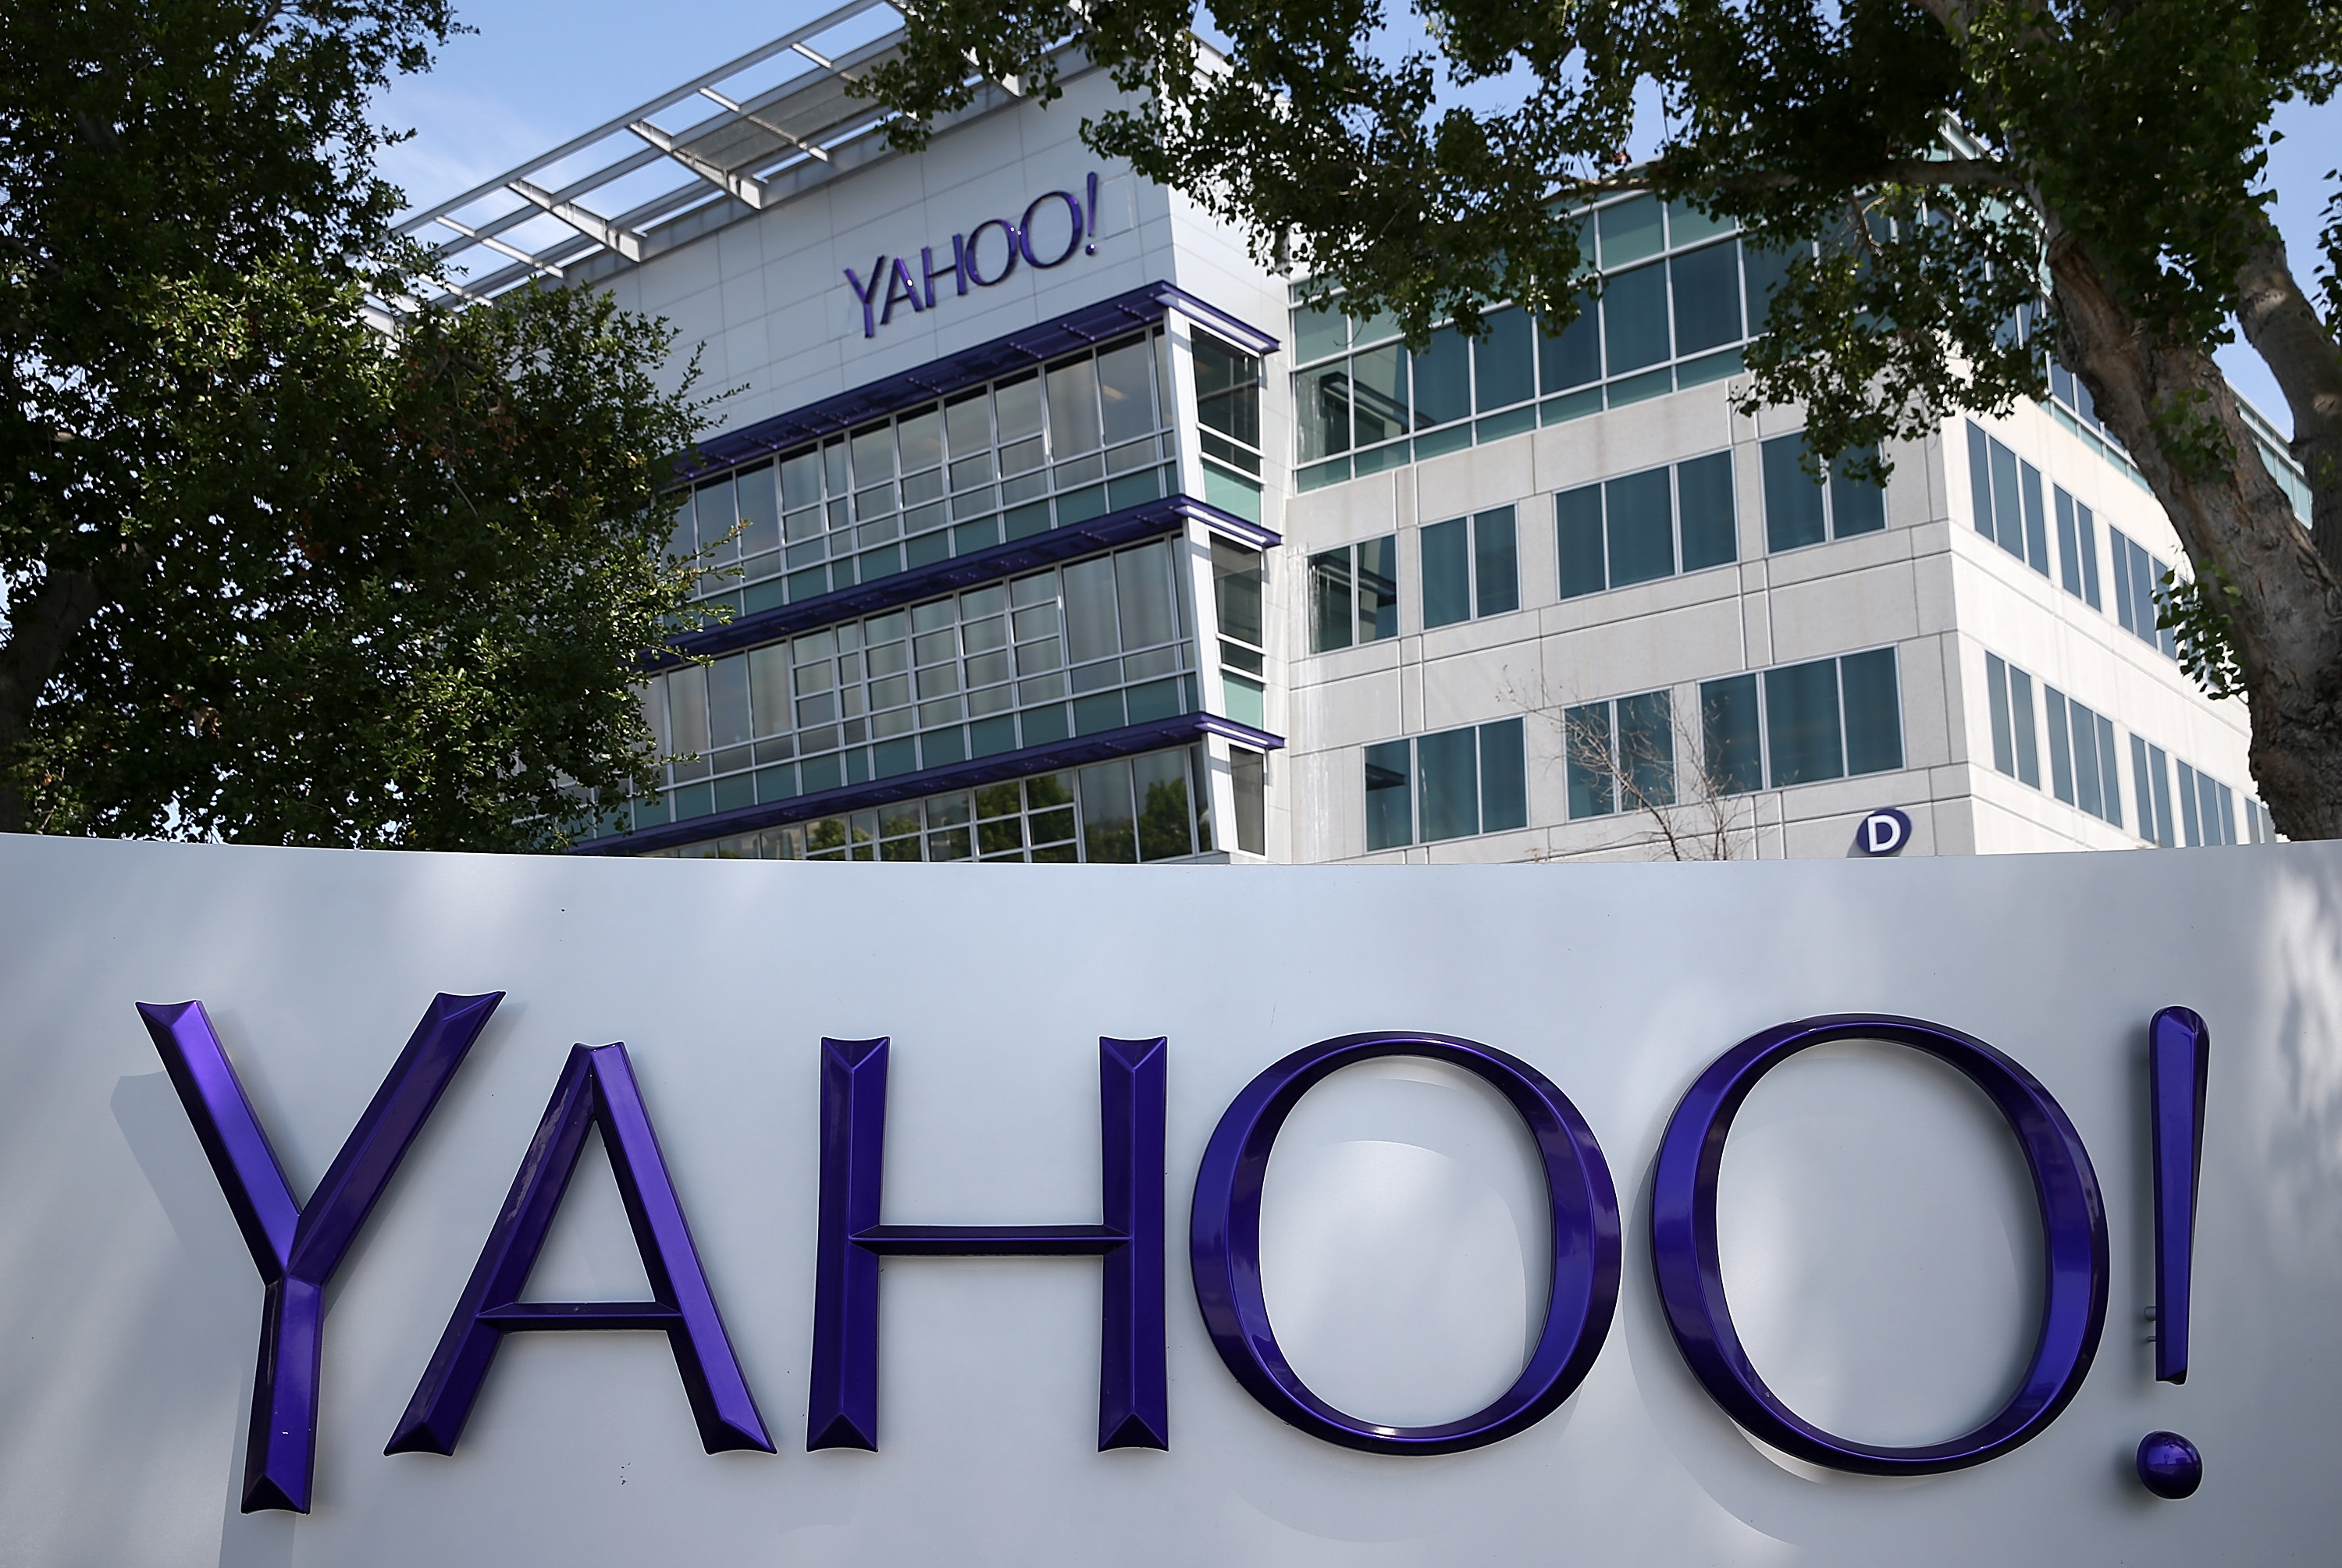 A sign is posted in front of the Yahoo! headquarters on May 23, 2014 in Sunnyvale, California. (Justin Sullivan&mdash;Getty Images)